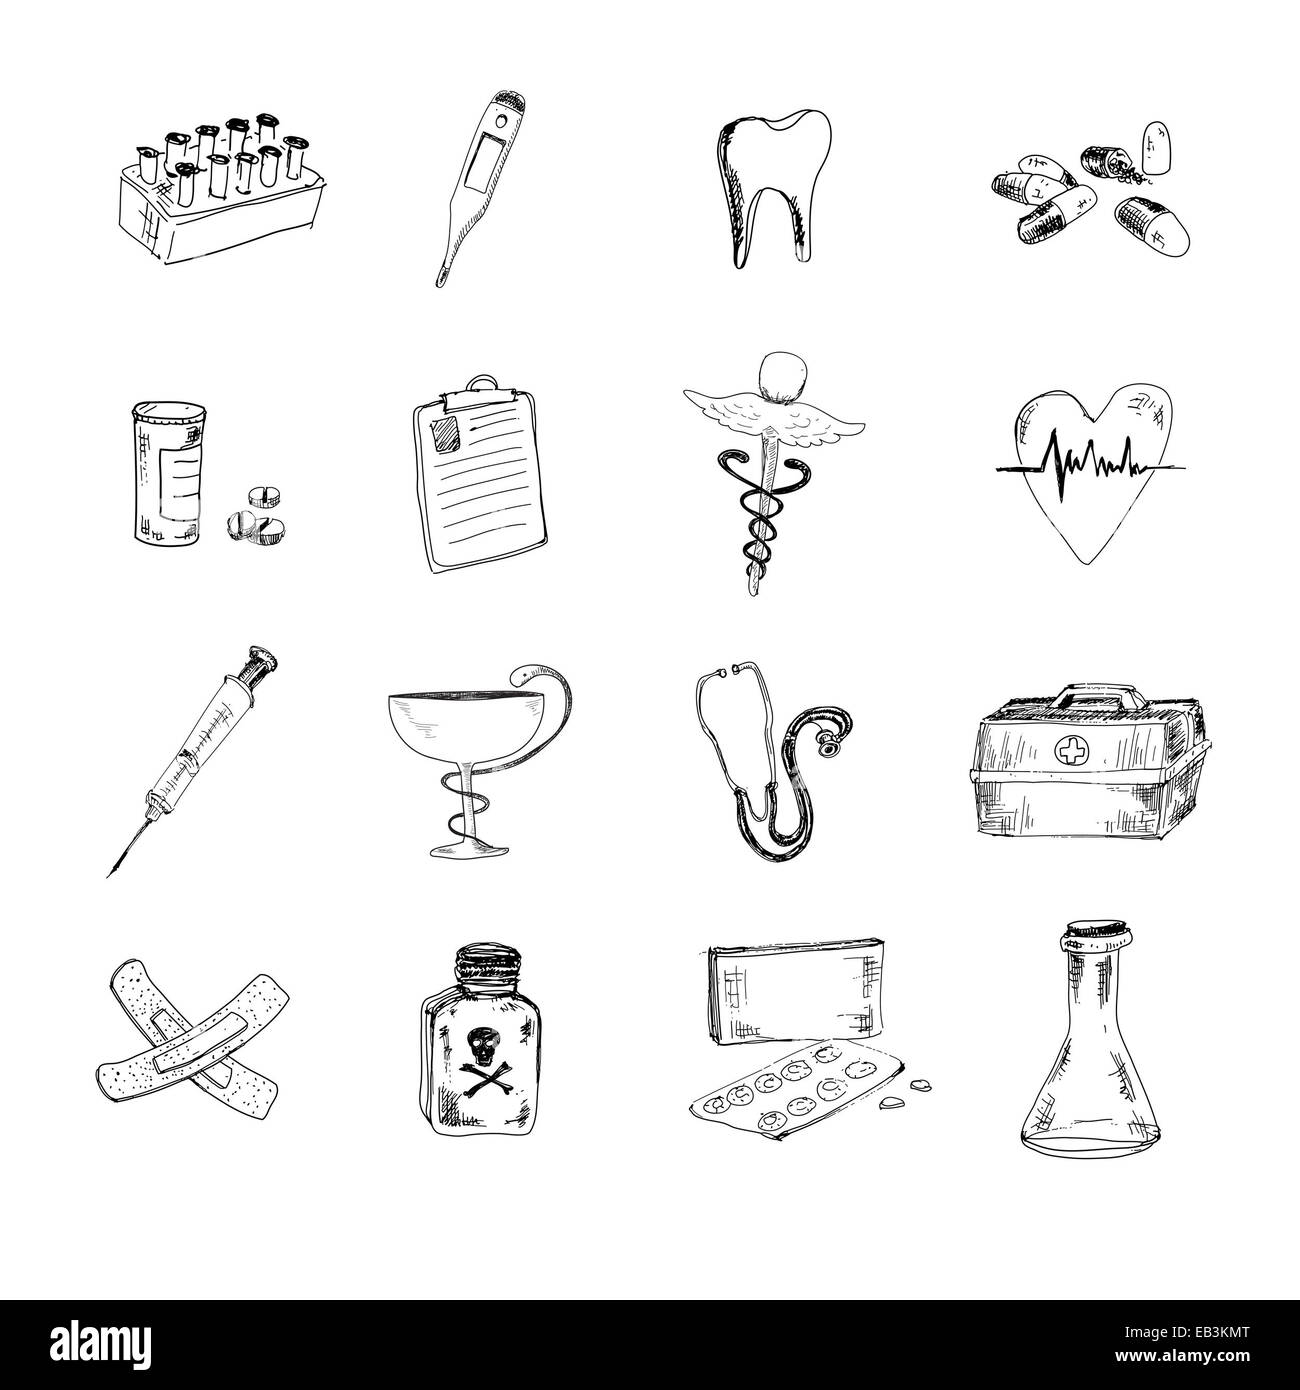 Medical set. Hand drawn doodle graphic illustrations Stock Photo